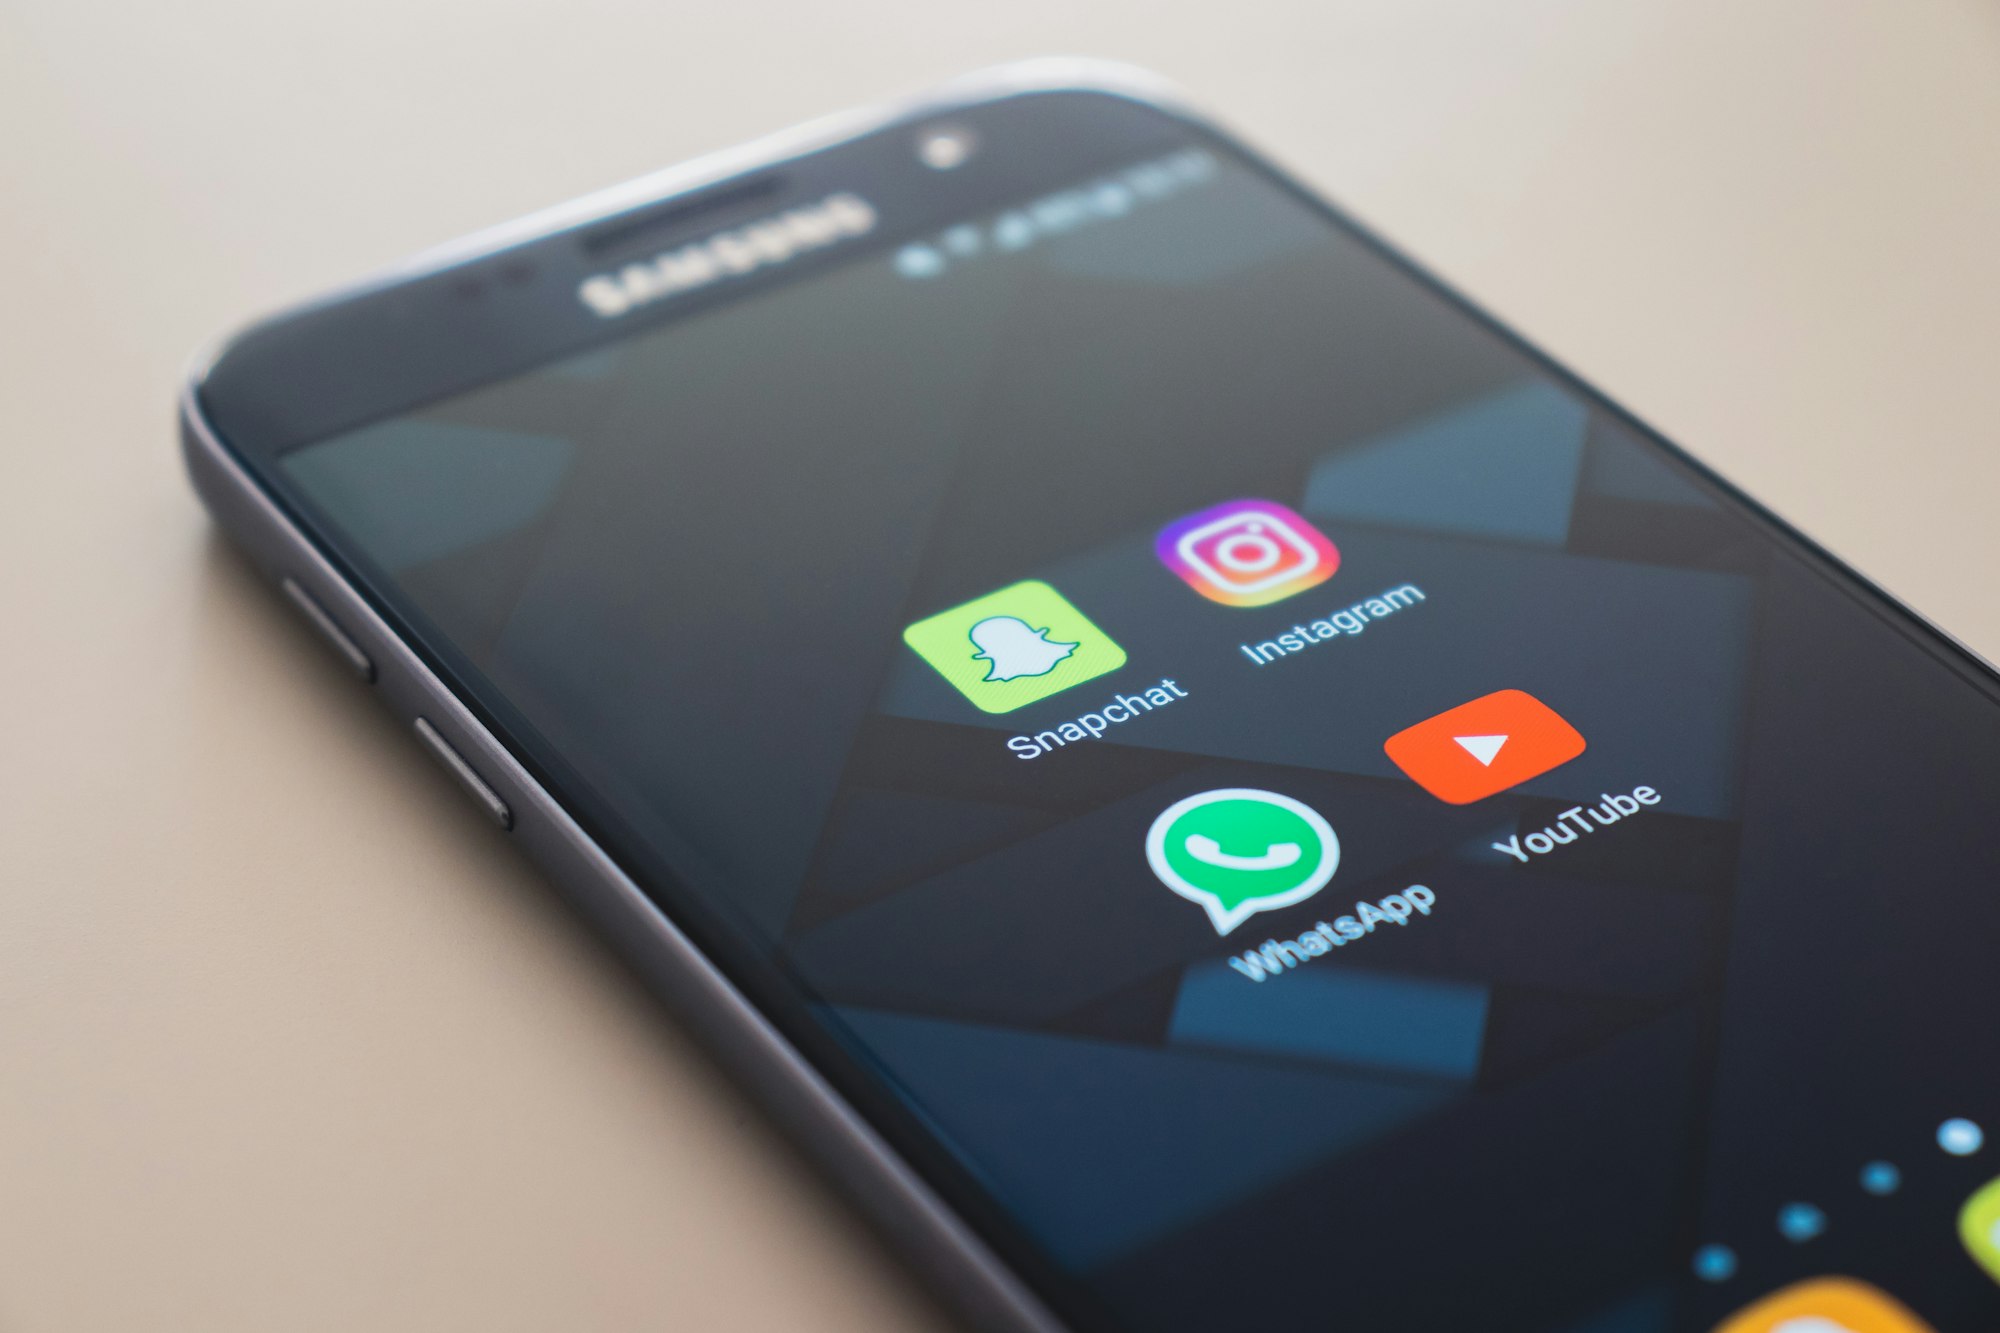 How to Use WhatsApp's Chat Lock Feature on an Android Phone